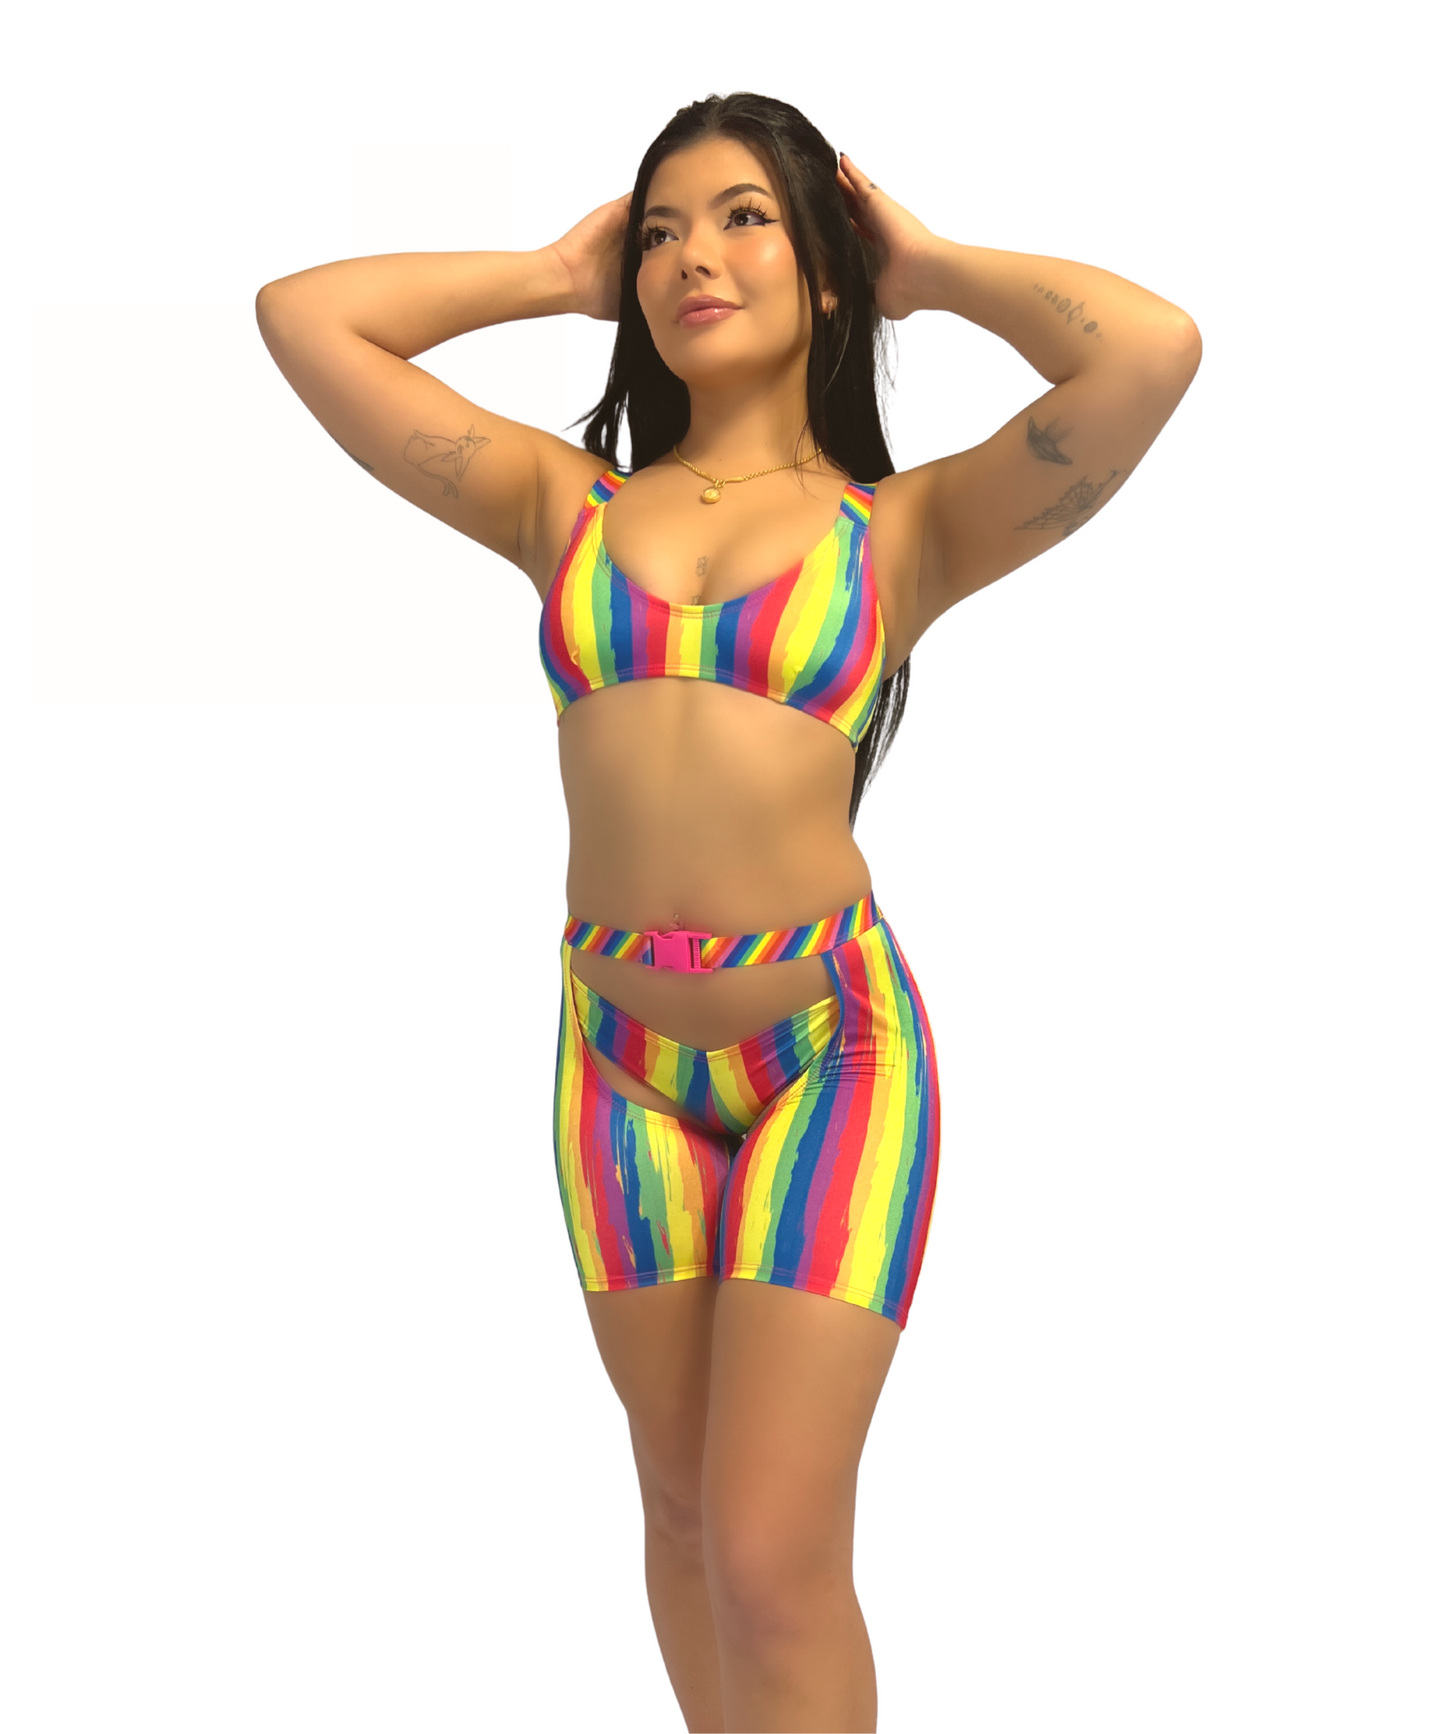 Rainbow Thigh Chaps Great For Rave -Festivals and Pride Events